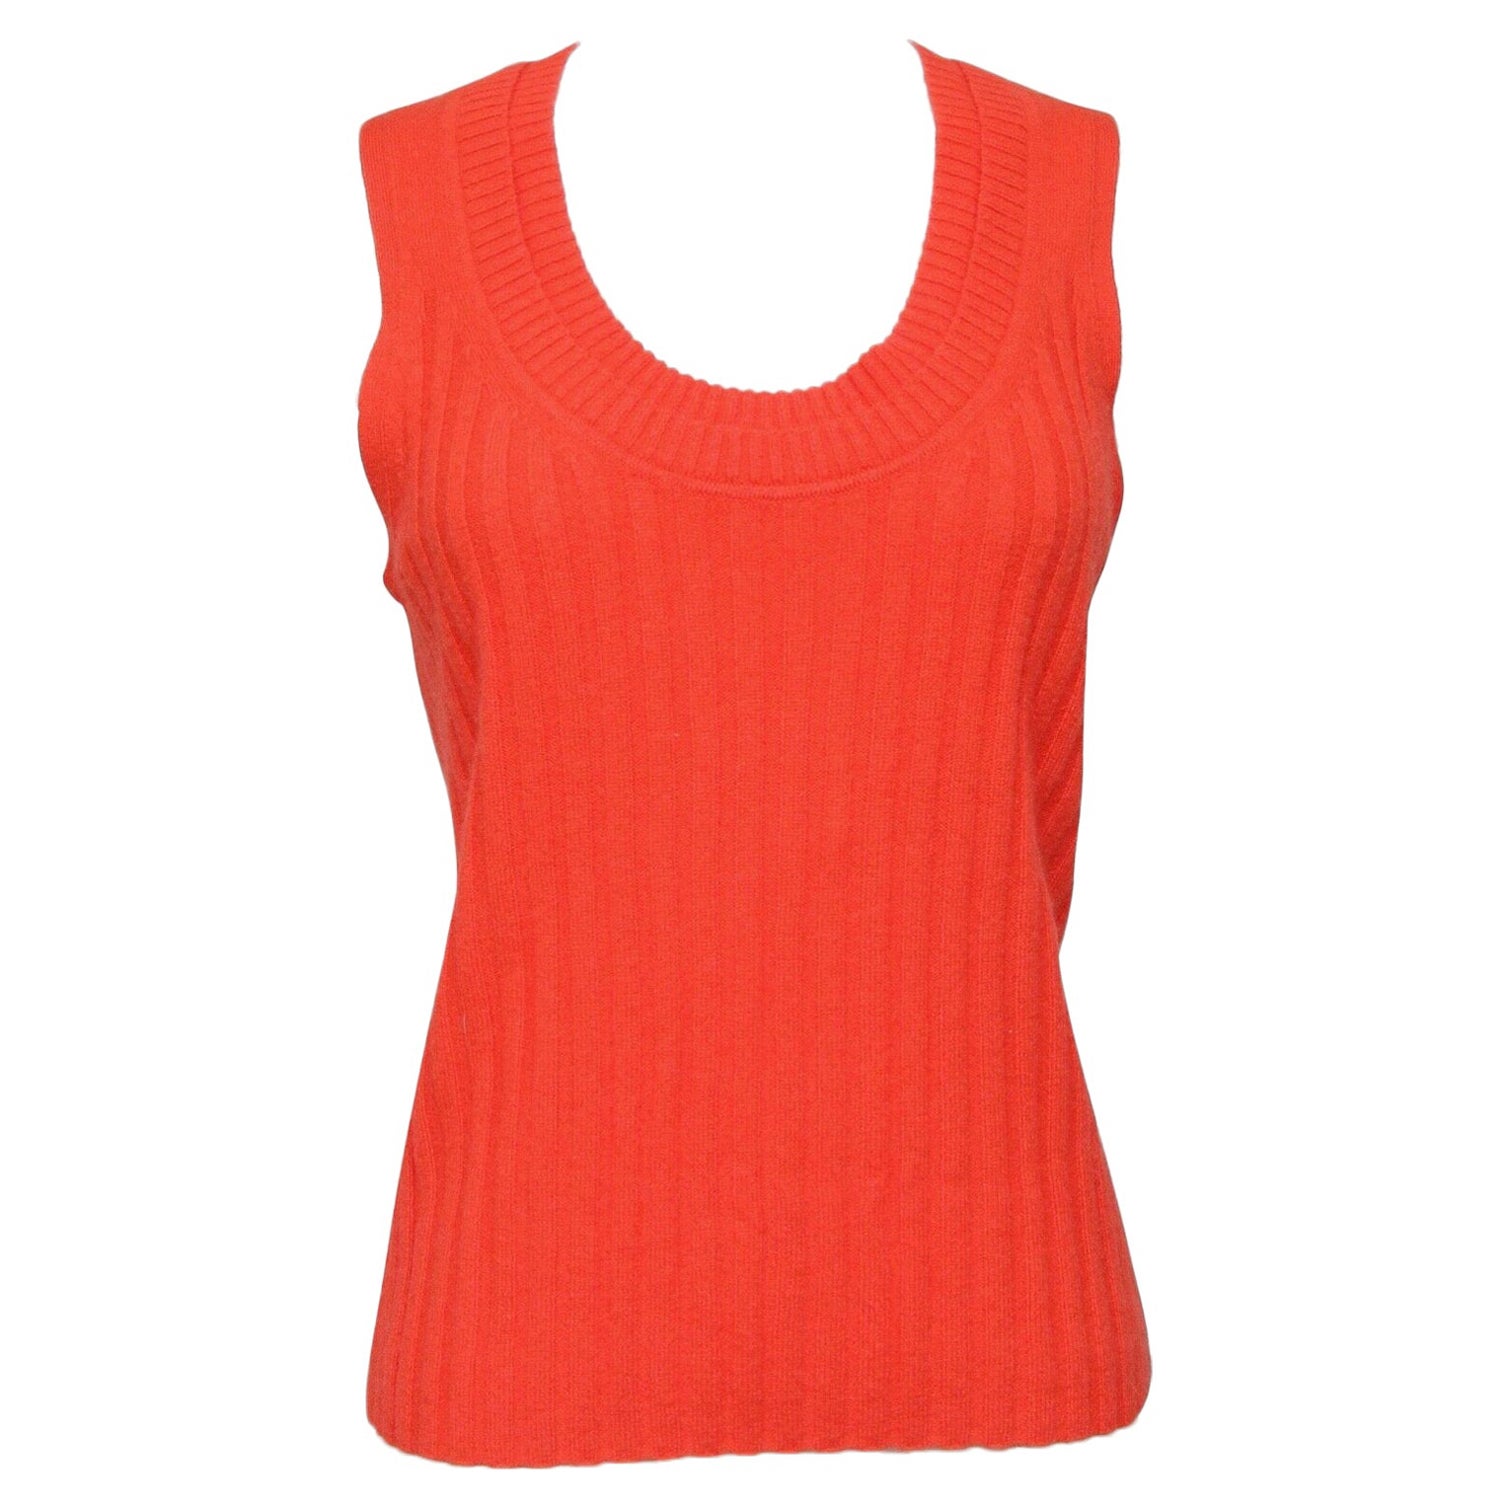 3.1 PHILLIP LIM Orange Sweater Knit Sleeveless Scoop Neck Ribbed Cashmere L NWT For Sale